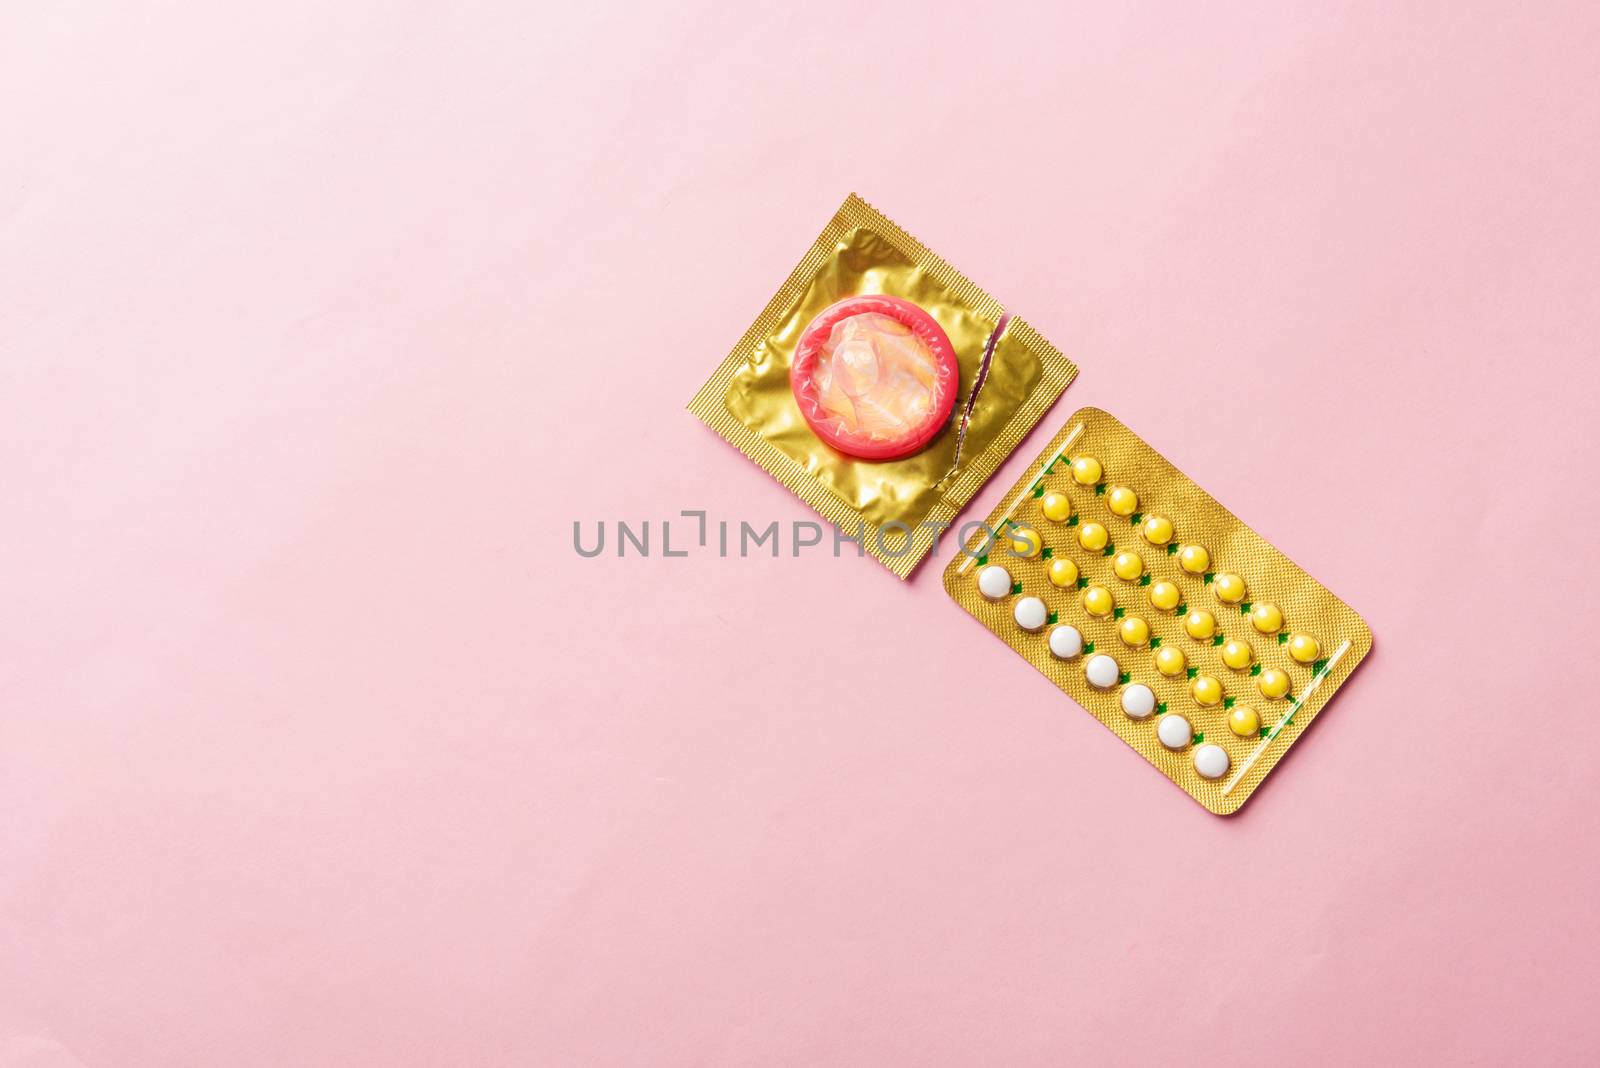 condom on wrapper pack and contraceptive pills blister by Sorapop